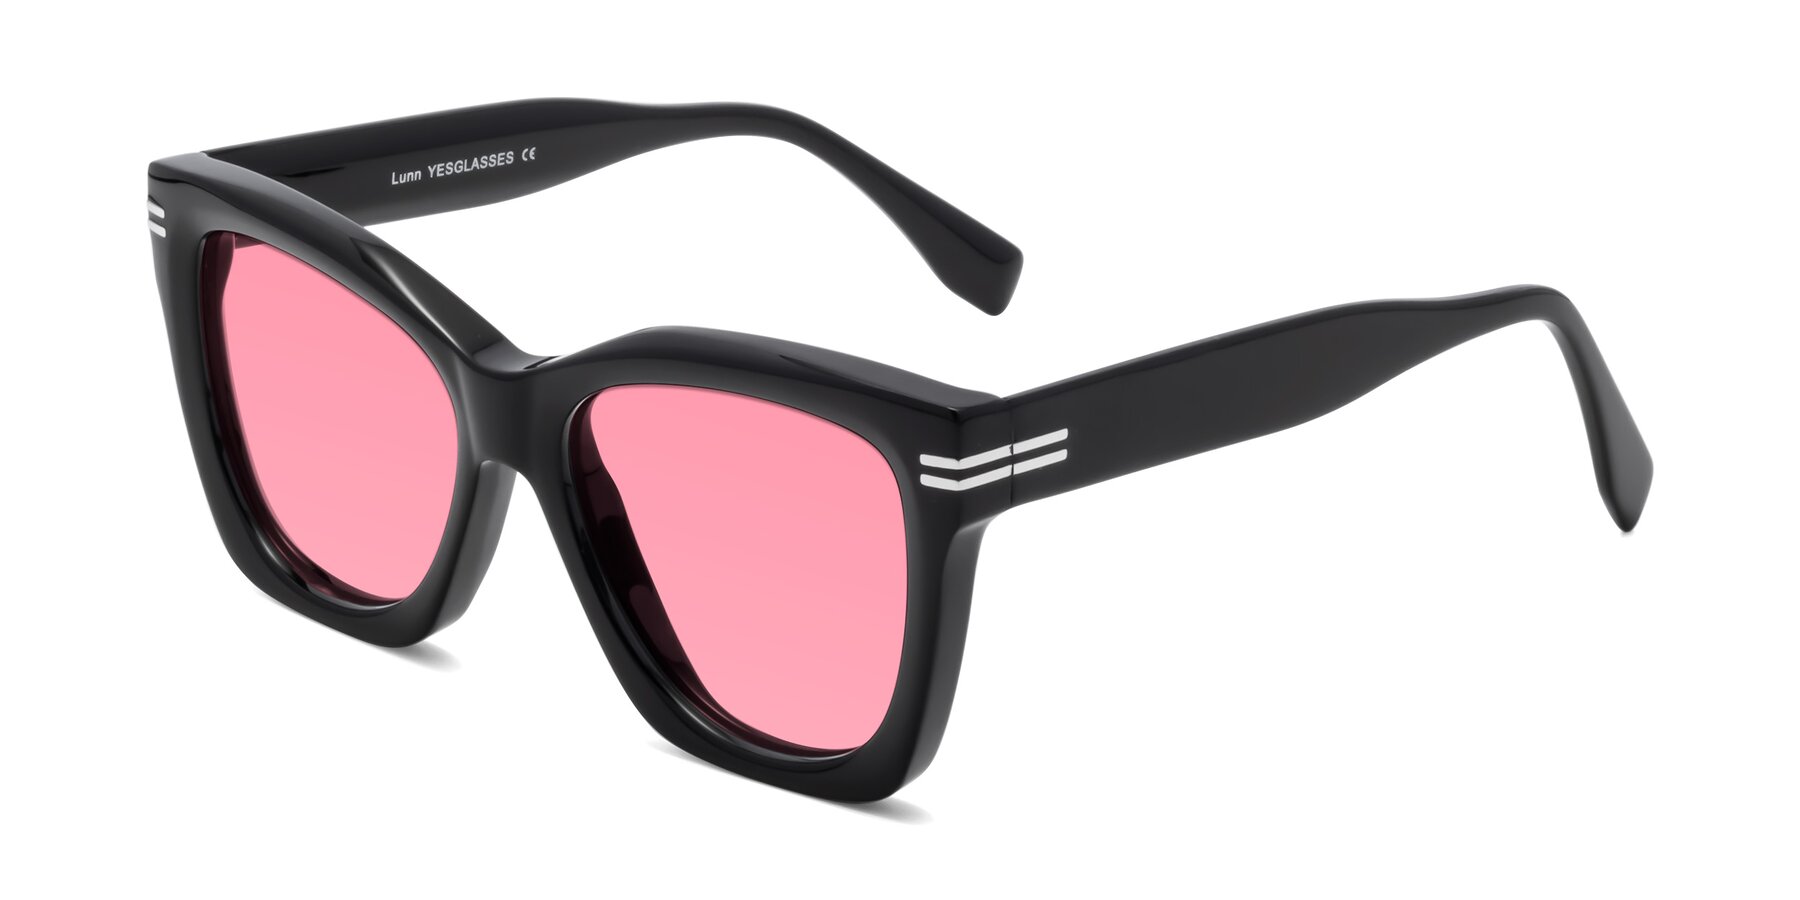 Angle of Lunn in Black with Pink Tinted Lenses